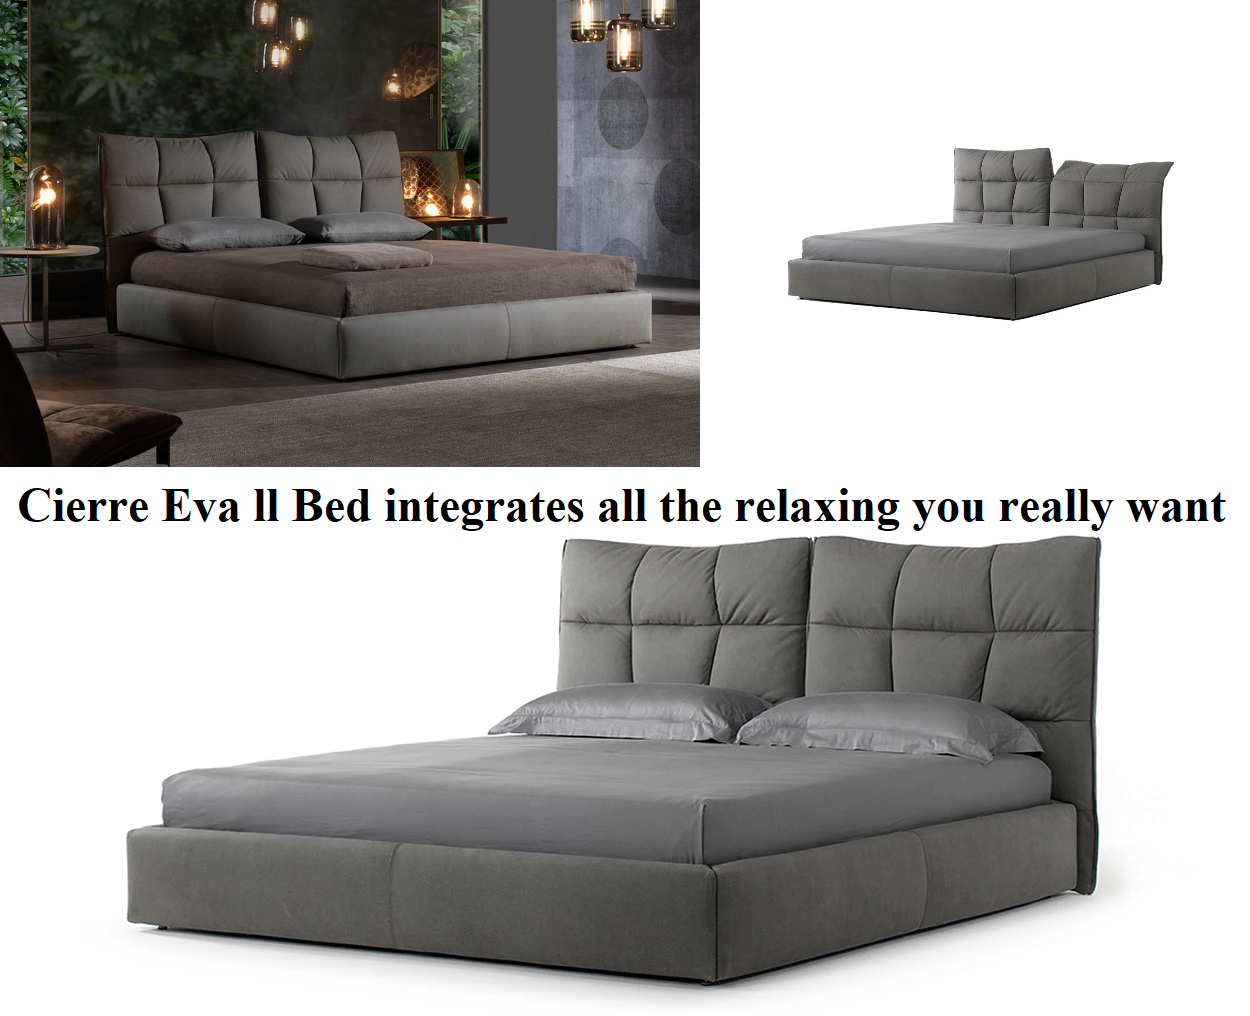 Cierre Eva ll Bed integrates all the relaxing you really want